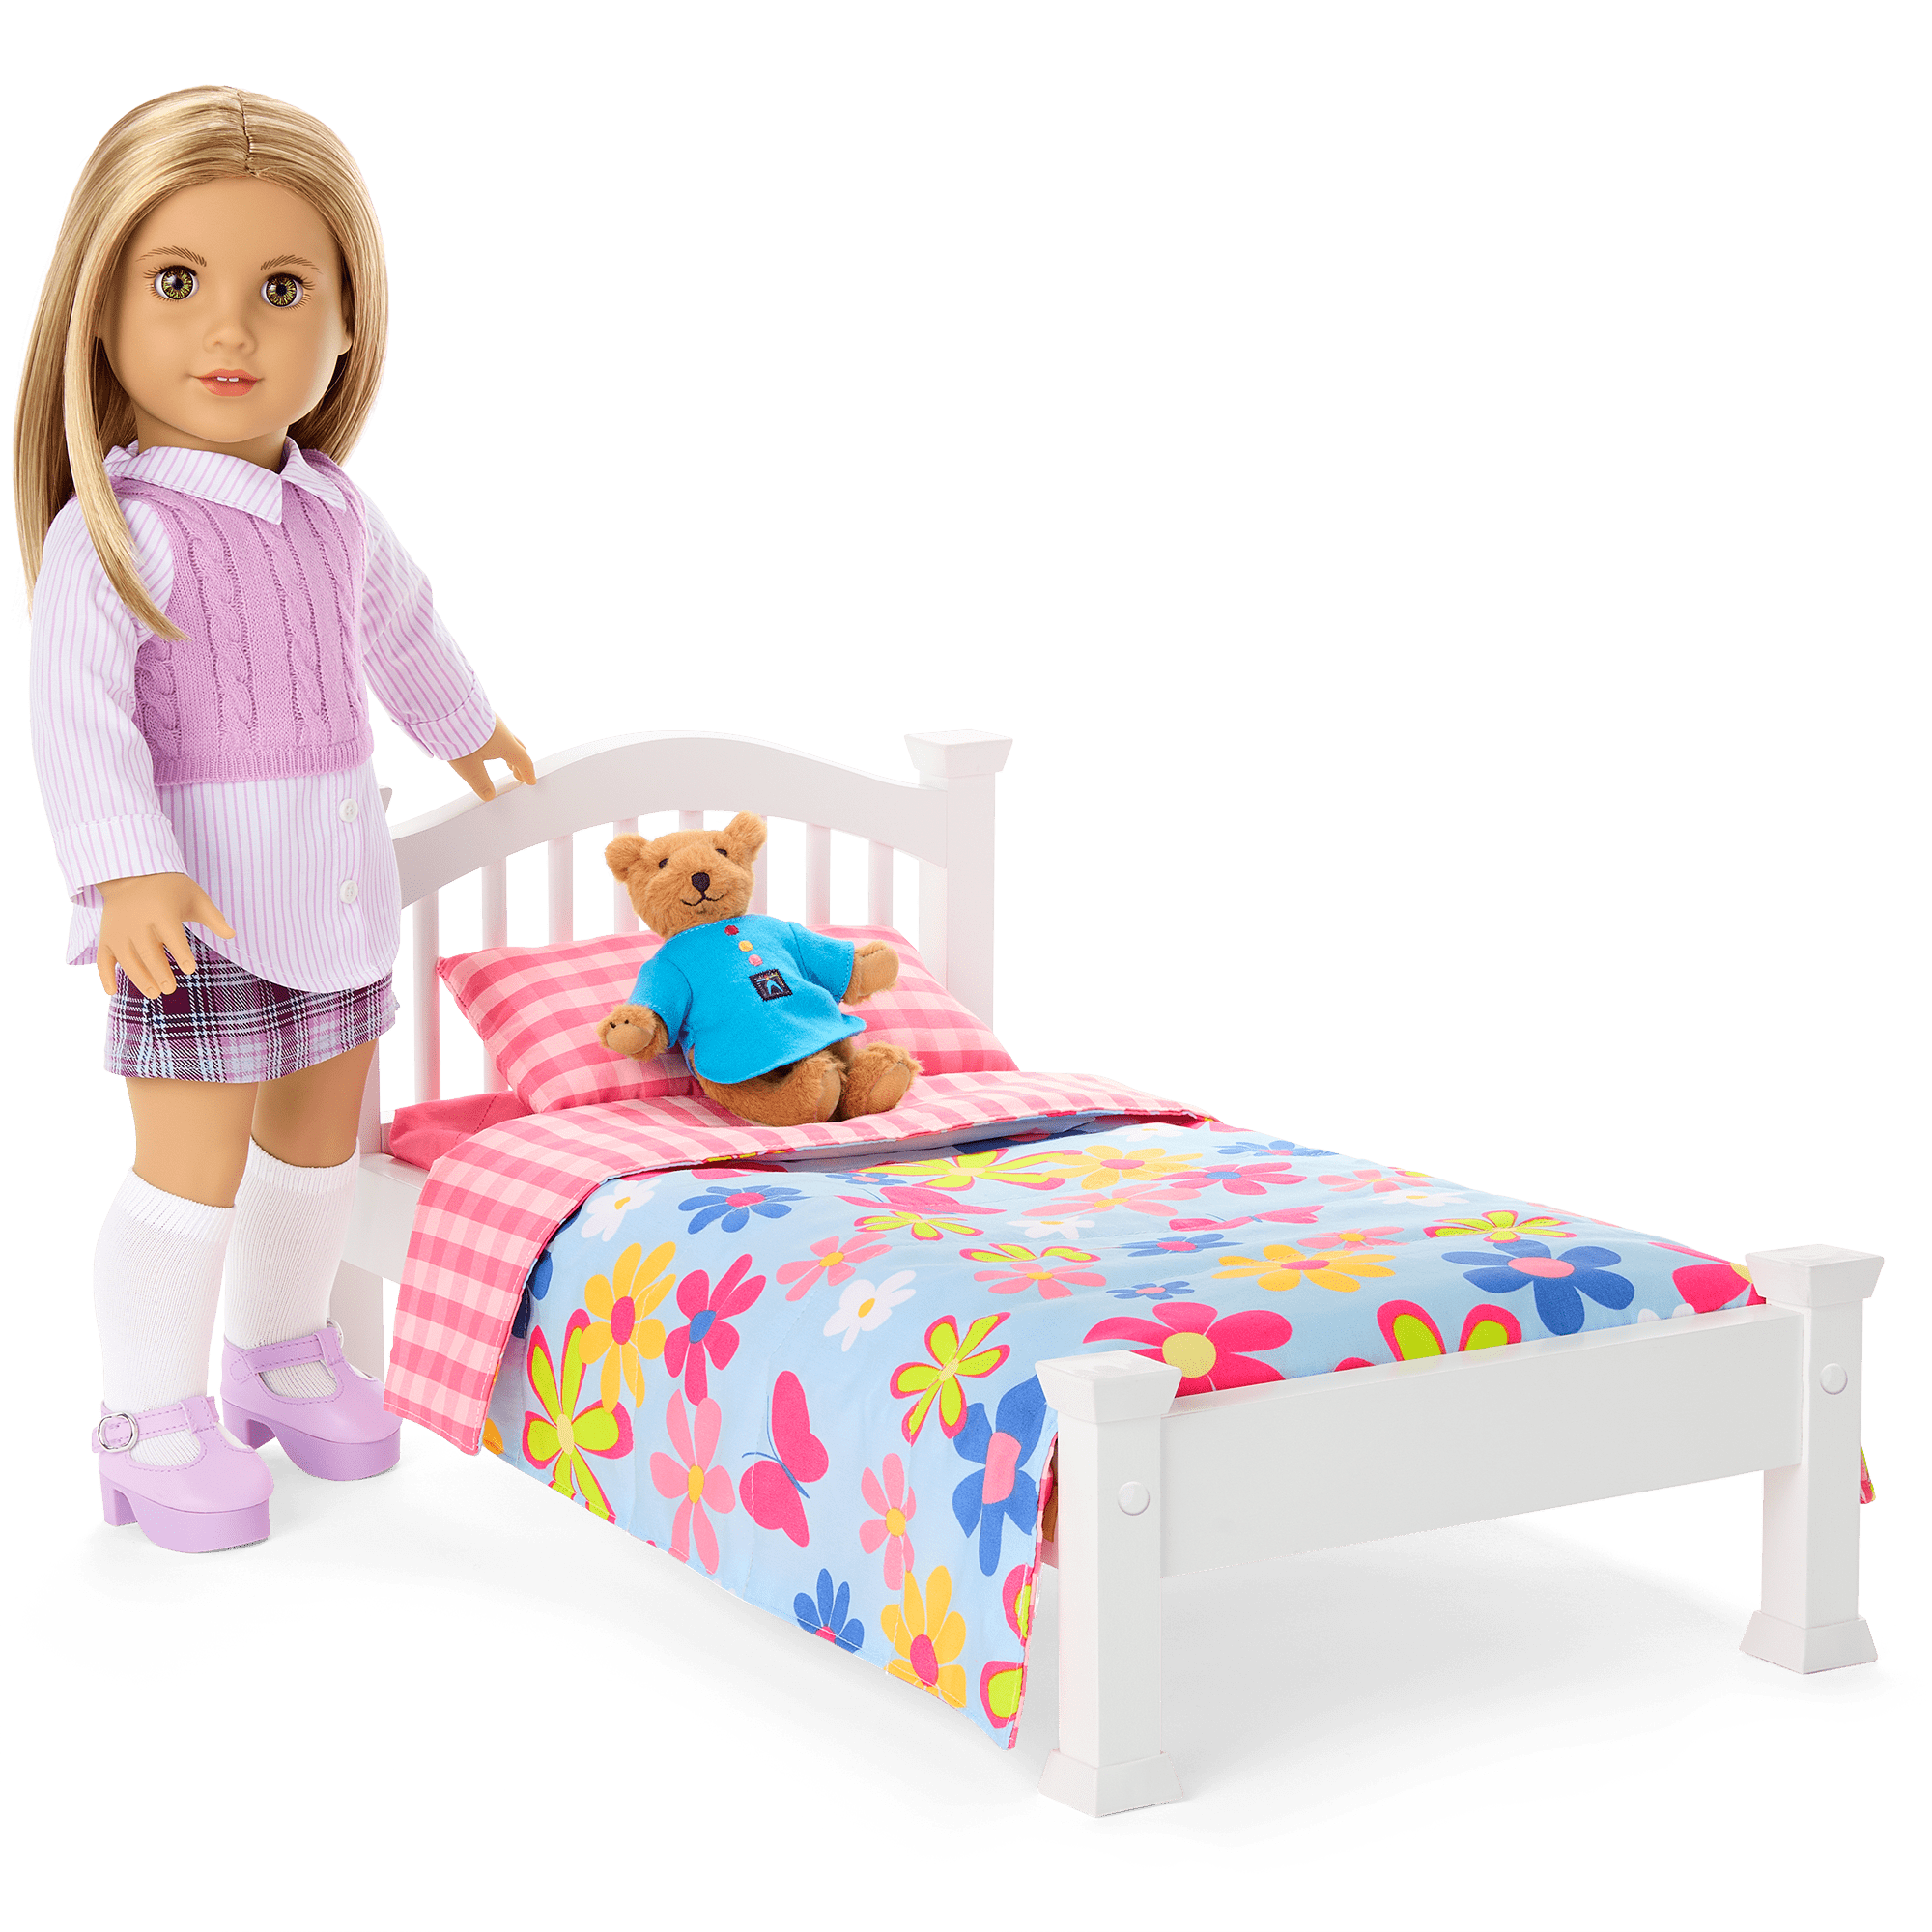 Isabel’s™ Bed & Floral Dreams Bedding Set for 18-inch Dolls (Historical Characters)